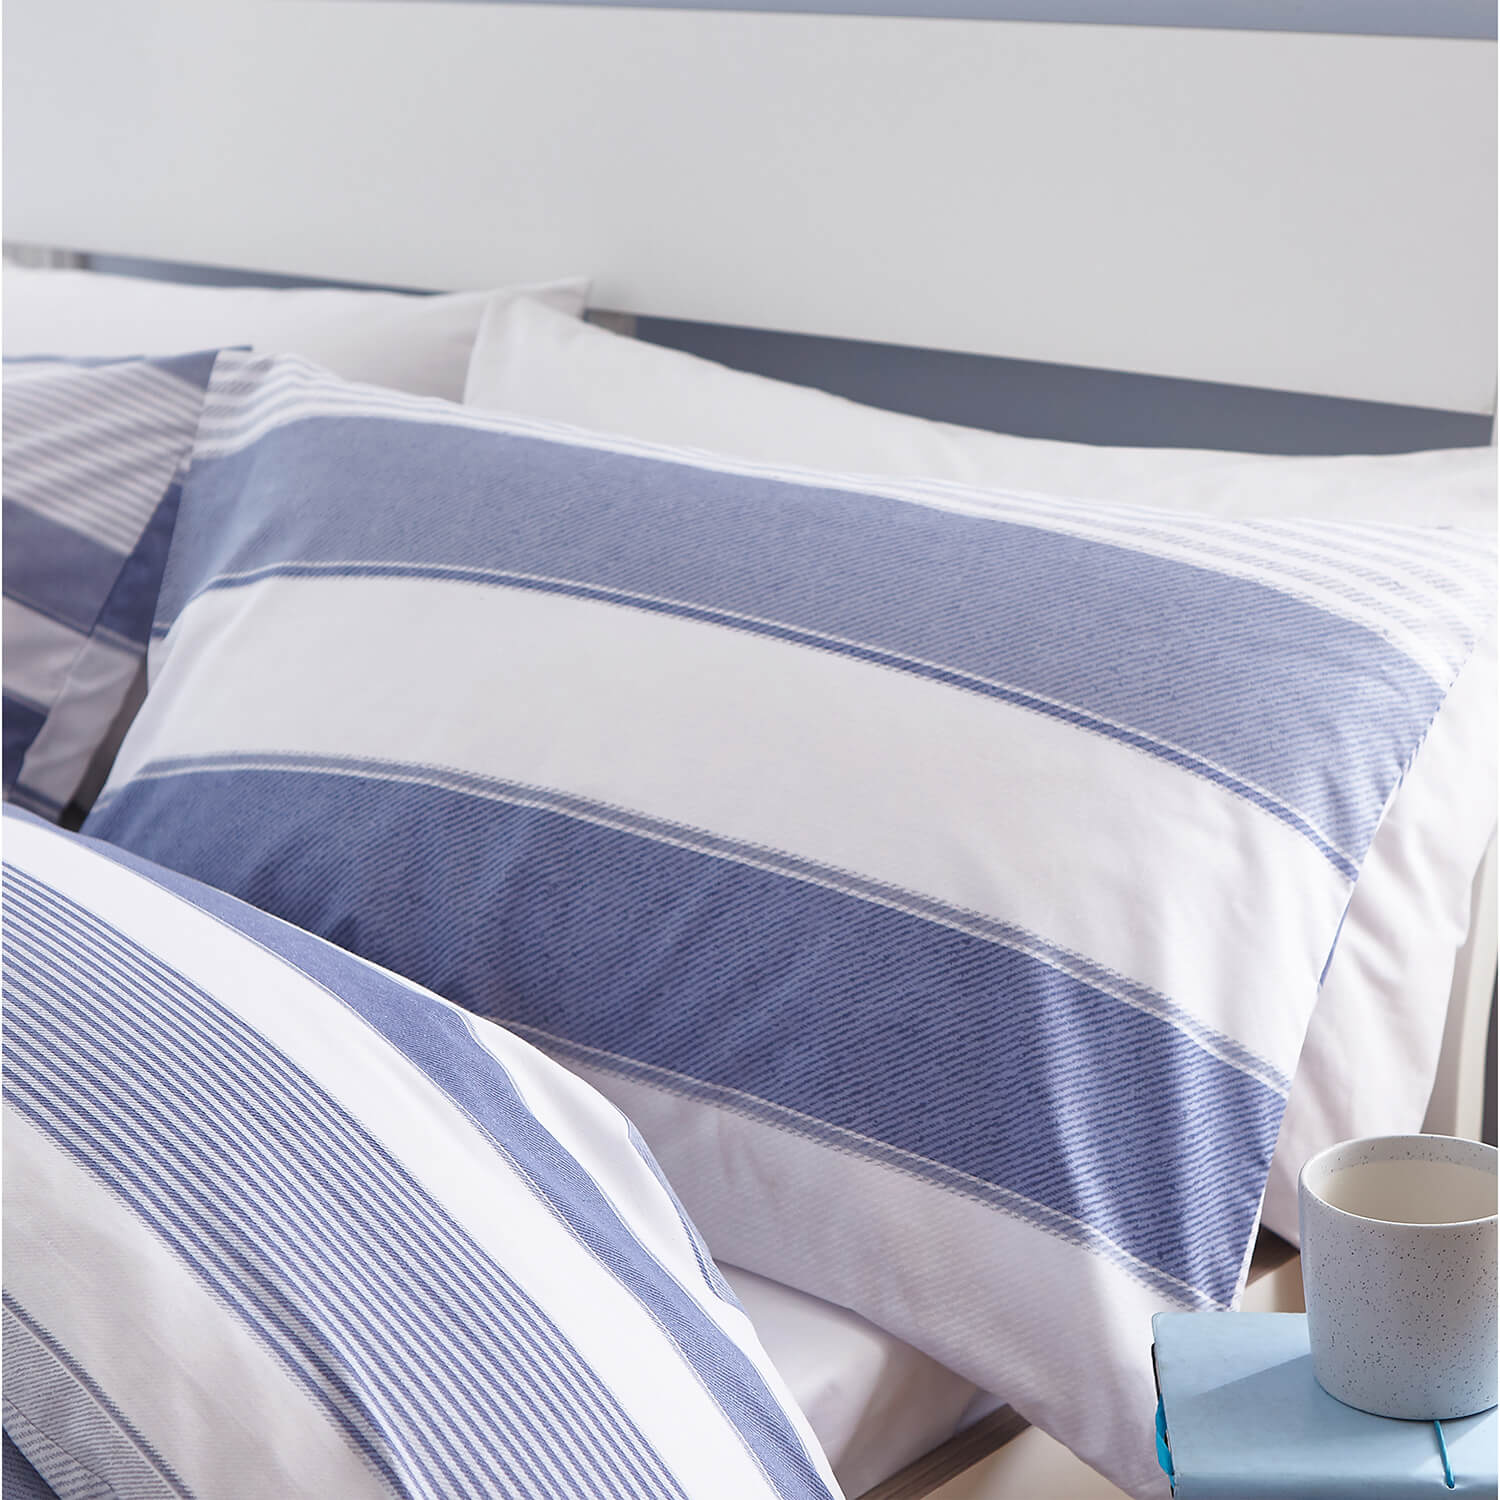  Catherine Lansfield Newquay Stripe Duvet Cover Set 3 Shaws Department Stores